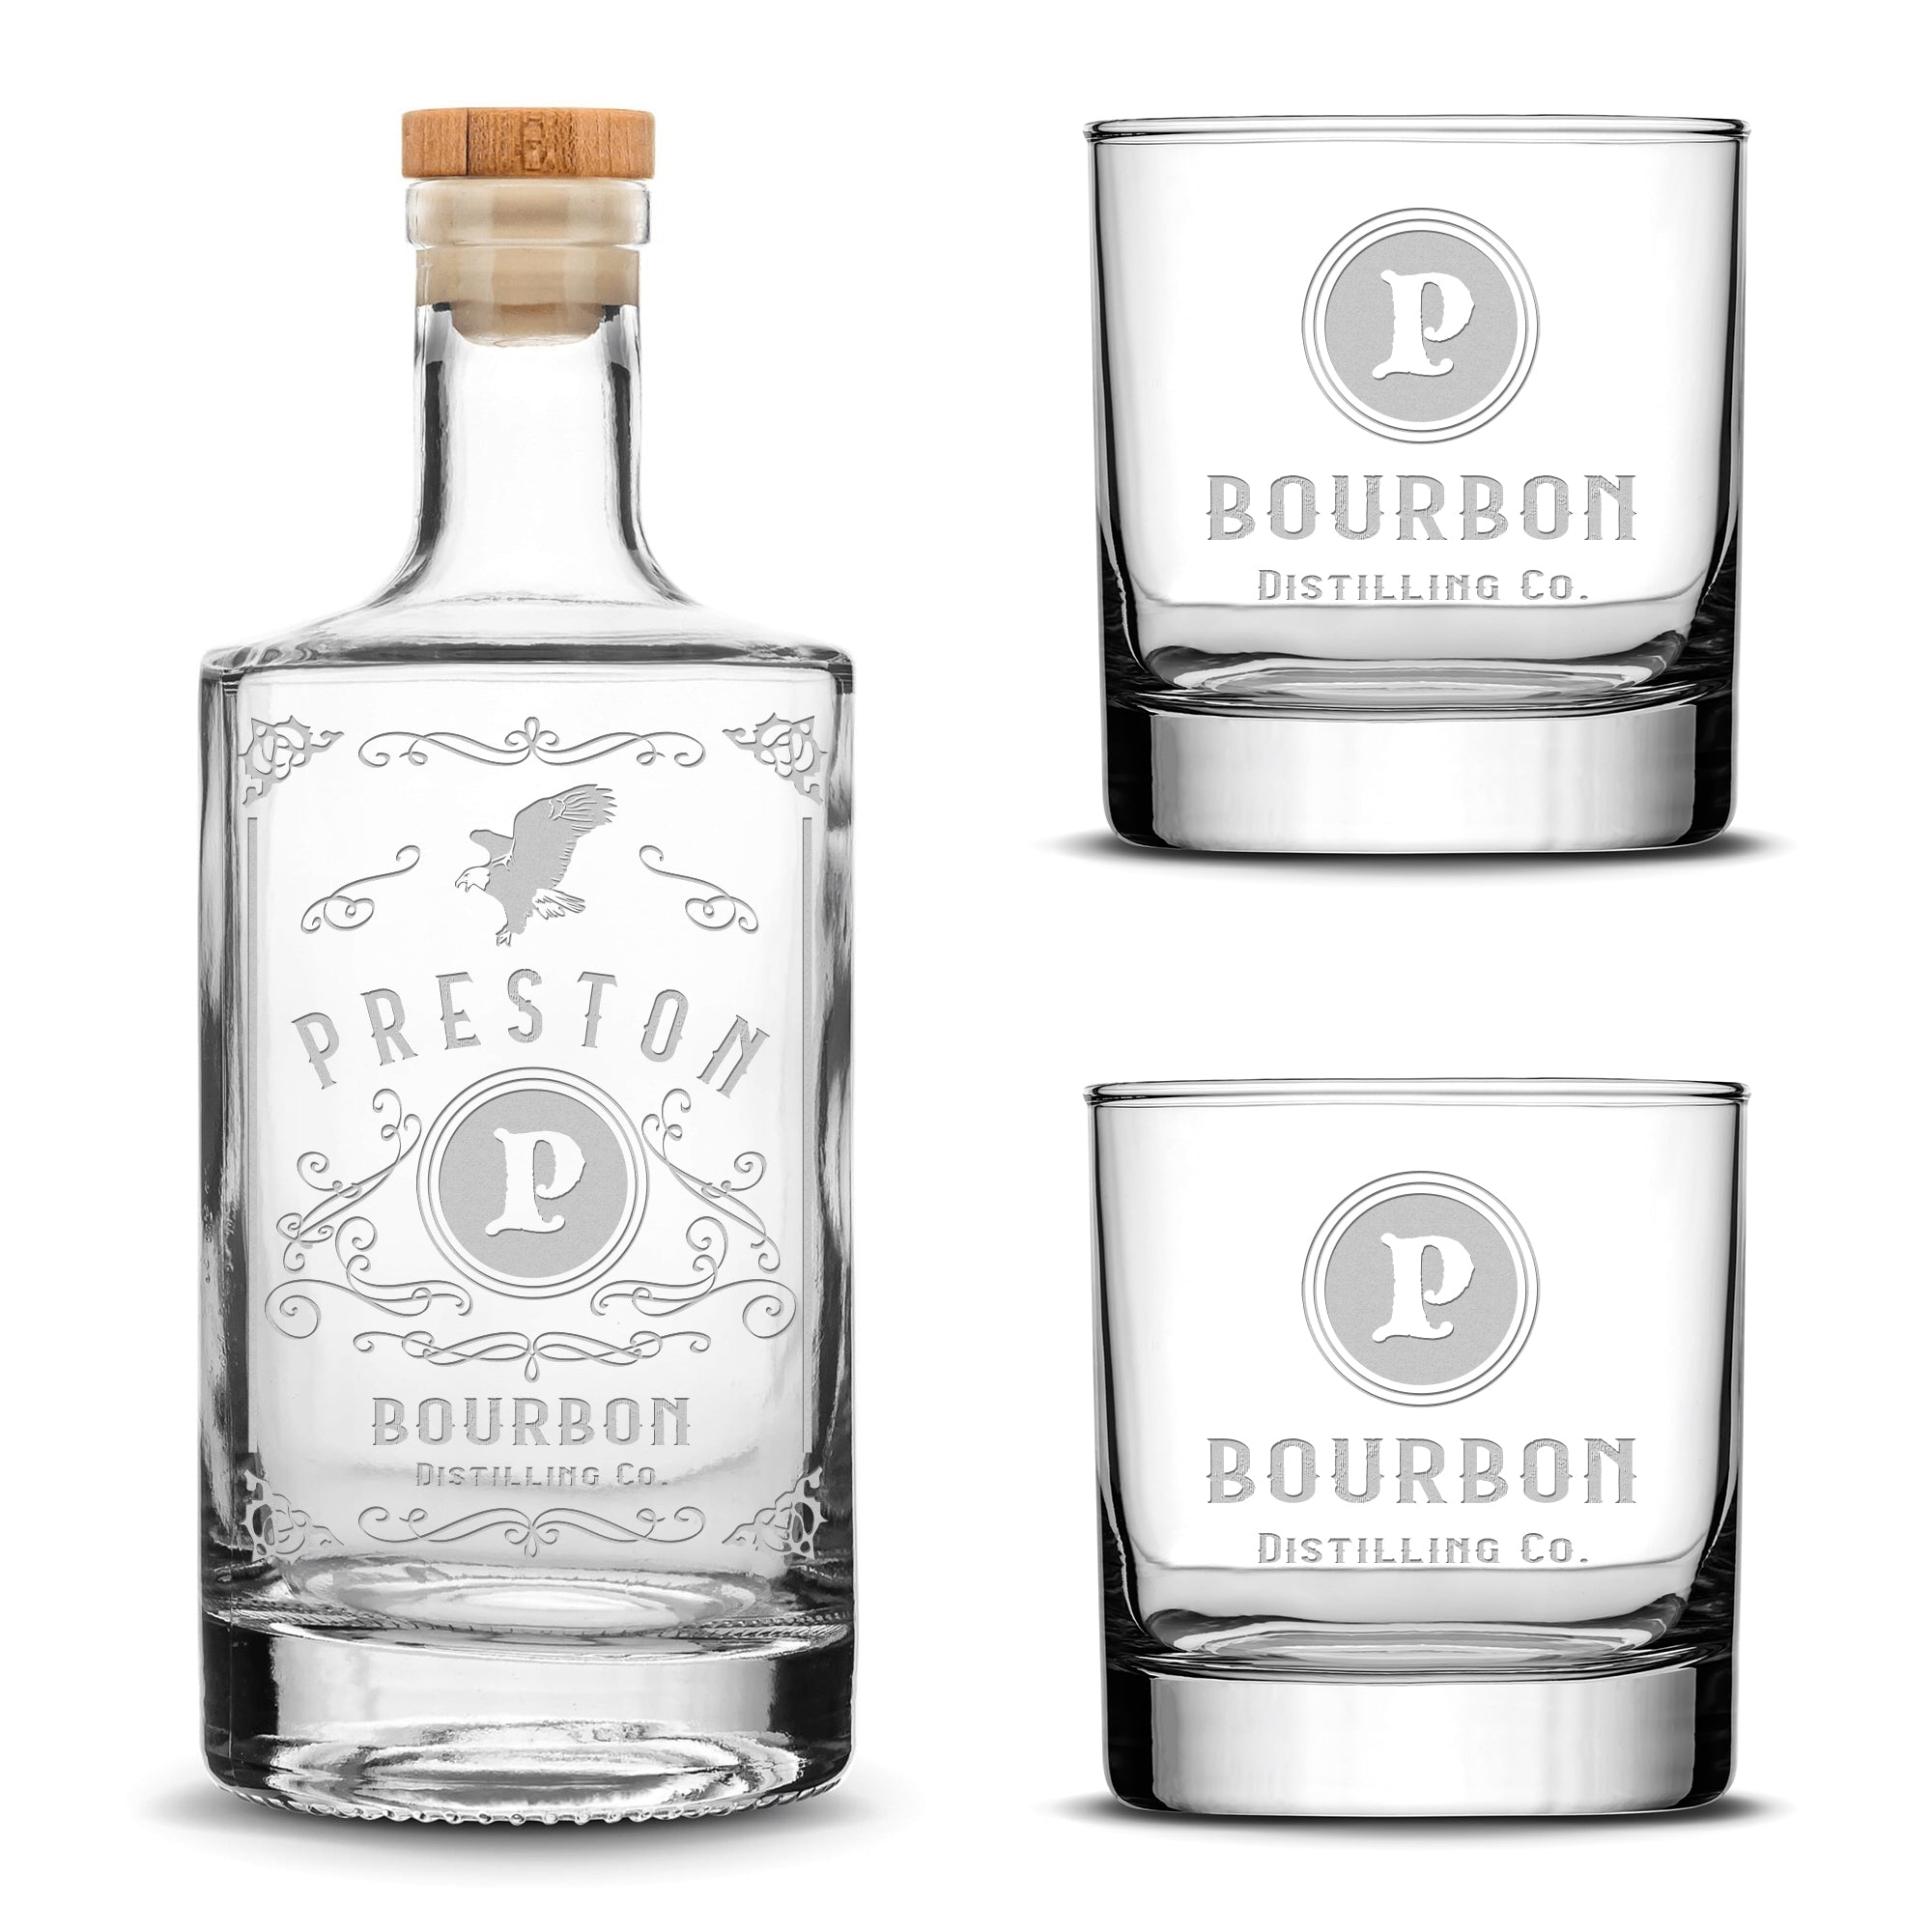 Integrity Bottles, Freedom Bourbon, Premium Jersey Style Liquor Bottle and (Set of 2) Premium Whiskey Glasses, Handmade, Handblown, Hand Etched Gifts, Sand Carved, 750ml